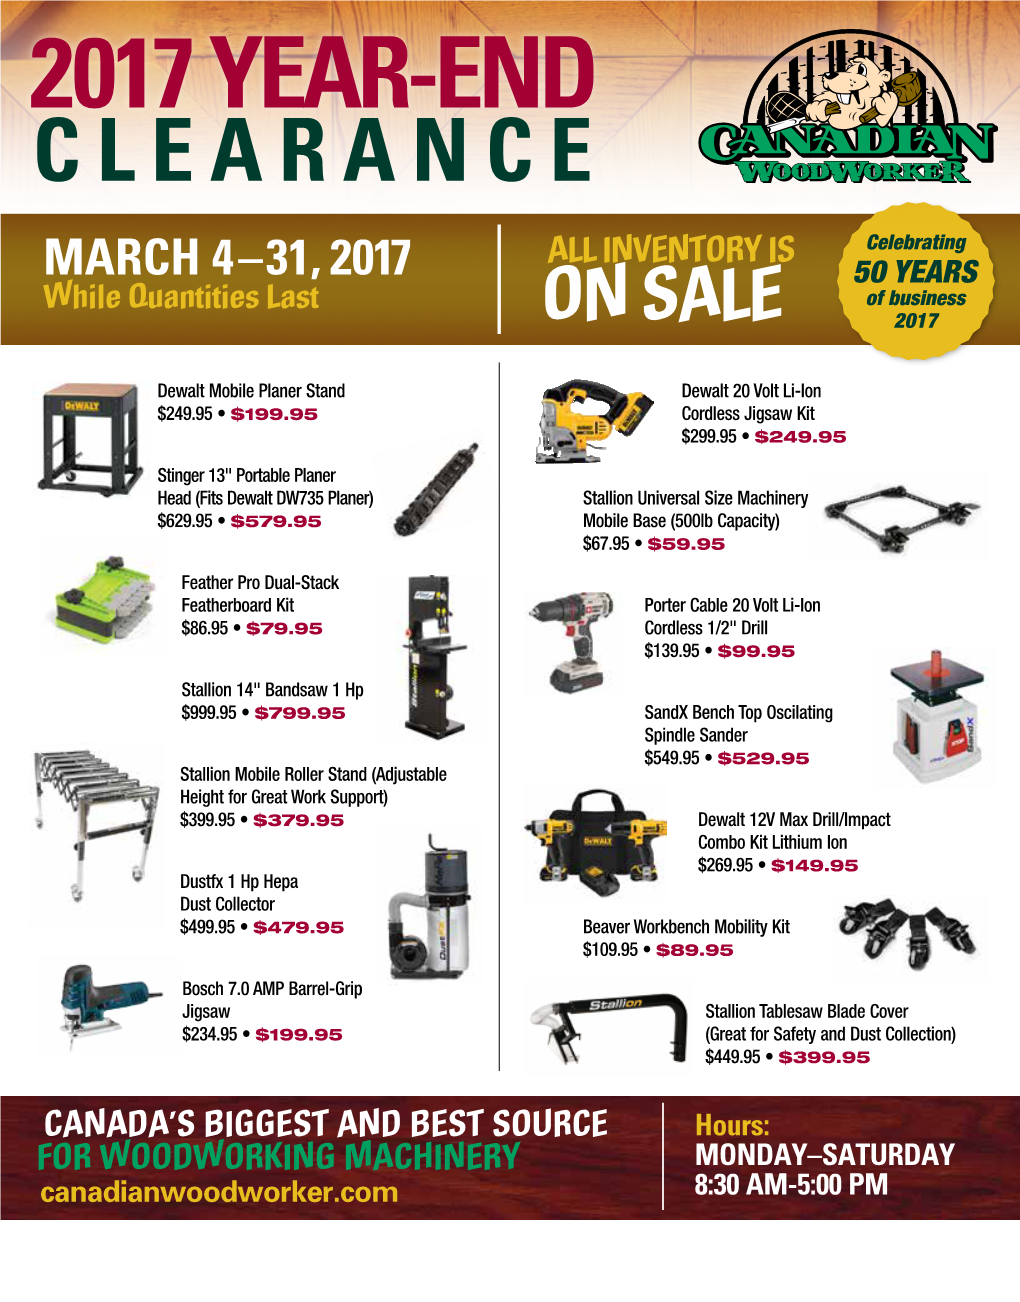 2017 YEAR-END CLEARANCE ALL INVENTORY IS Celebrating MARCH 4–31, 2017 50 YEARS While Quantities Last of Business on SALE 2017